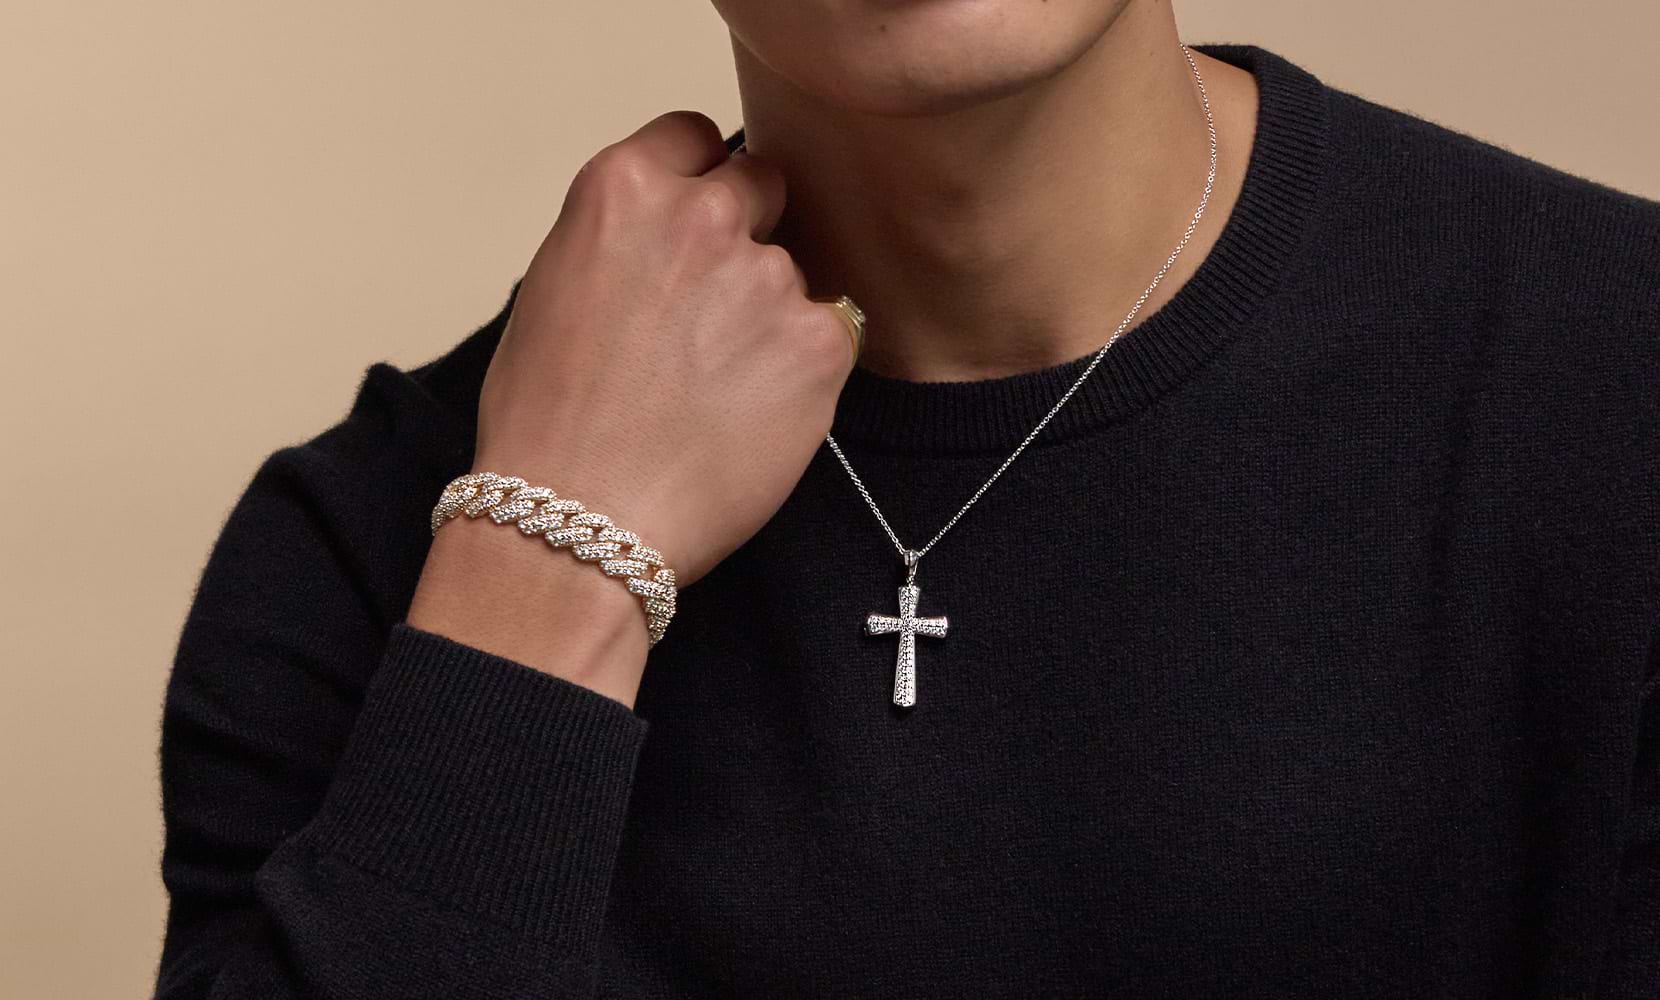 Image of a male model's neck and chest featuring a men's bracelet and a diamond cross necklace